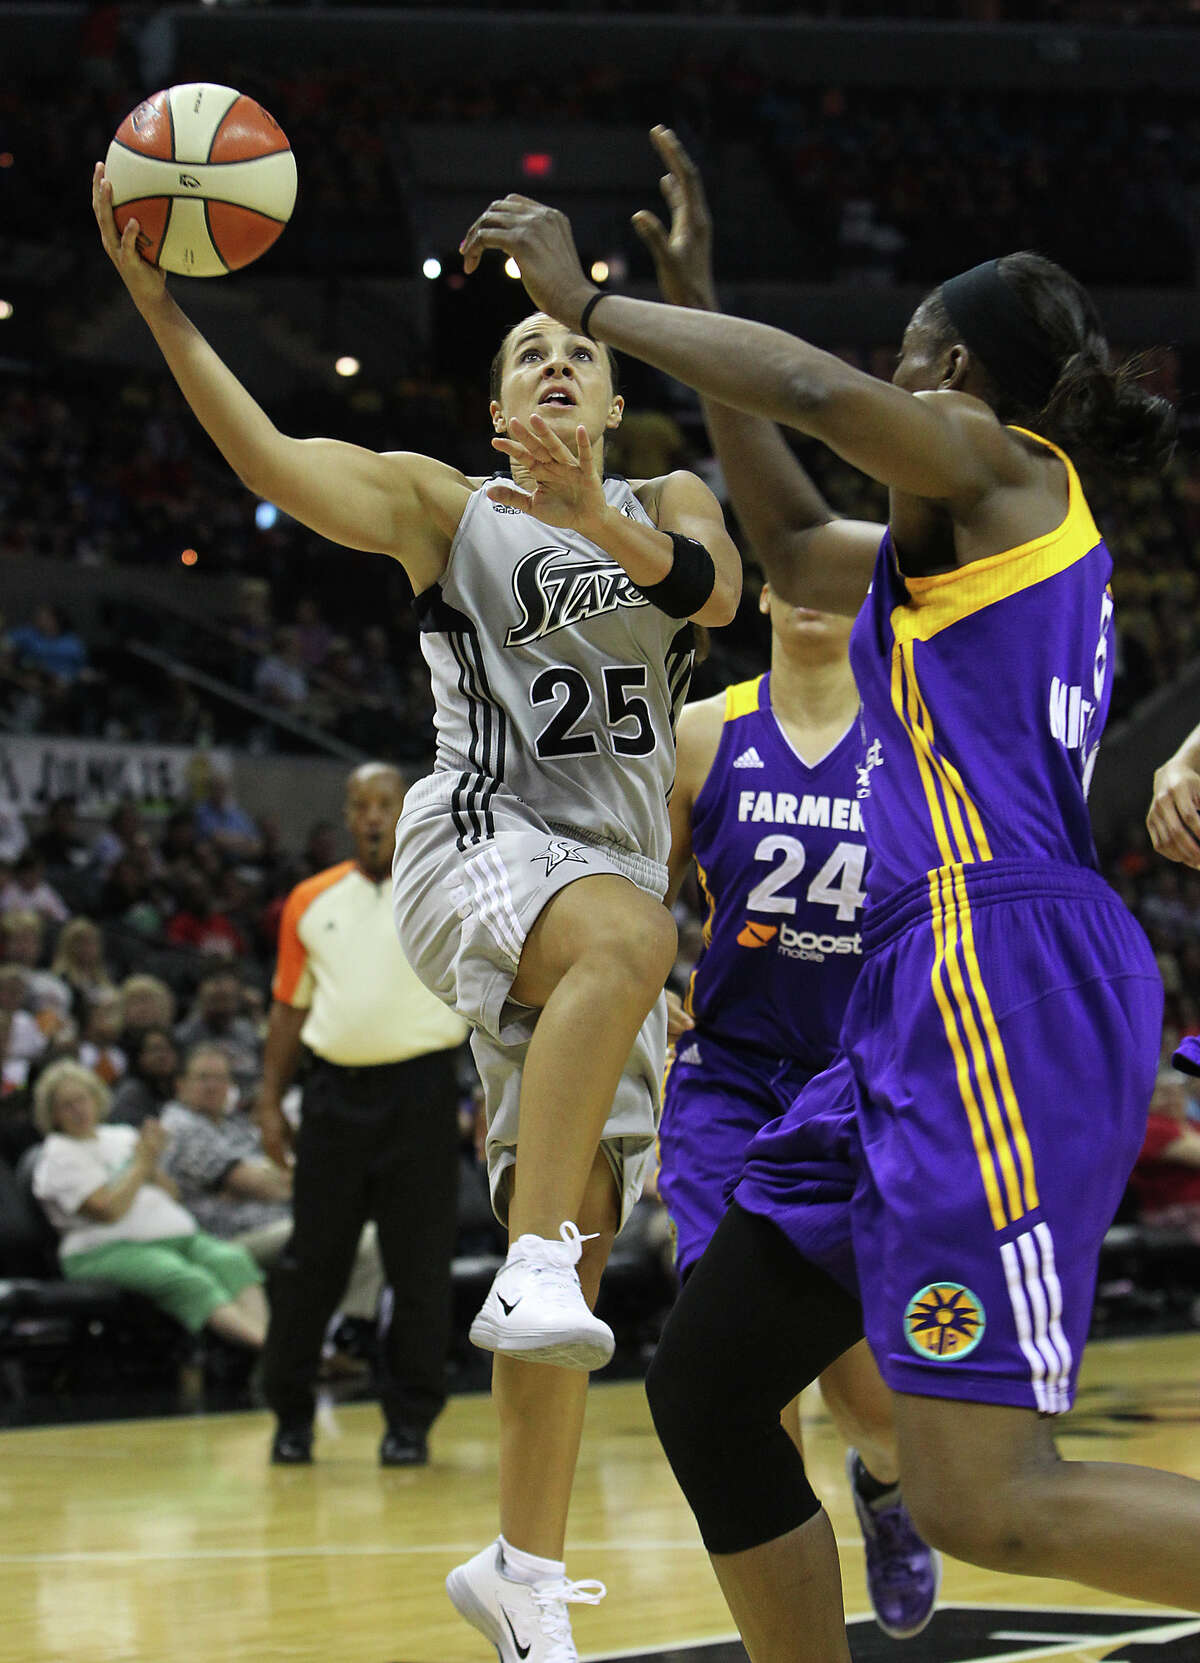 Silver Stars' Becky Hammon (25) goes up for a shot against the Los Angeles Sparks' DeLisha Milton-Jones (08) in the first half at the AT&T Center on Thursday, June 28, 2012.